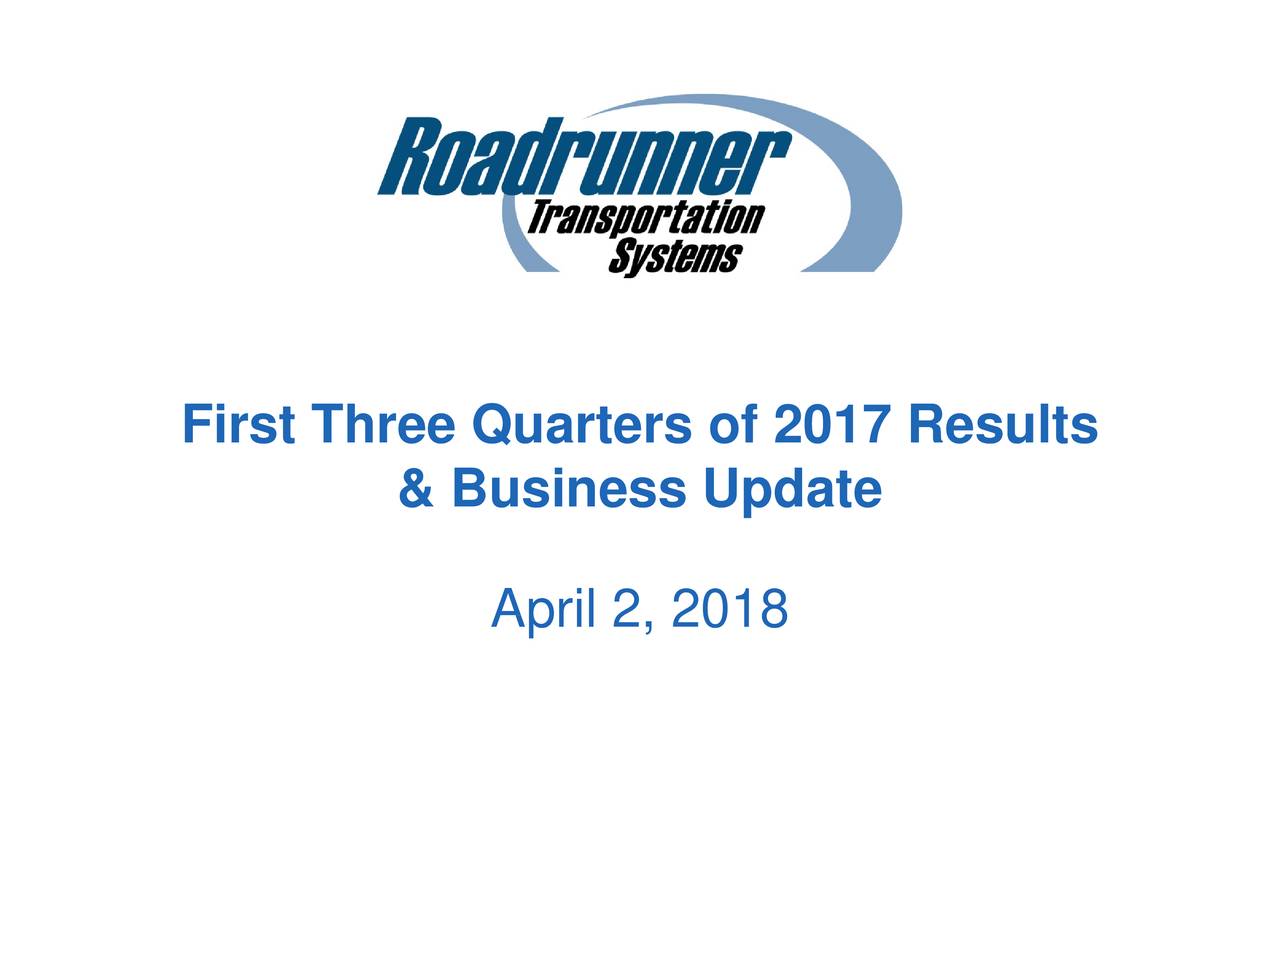 First Three Quarters of 2017 Results